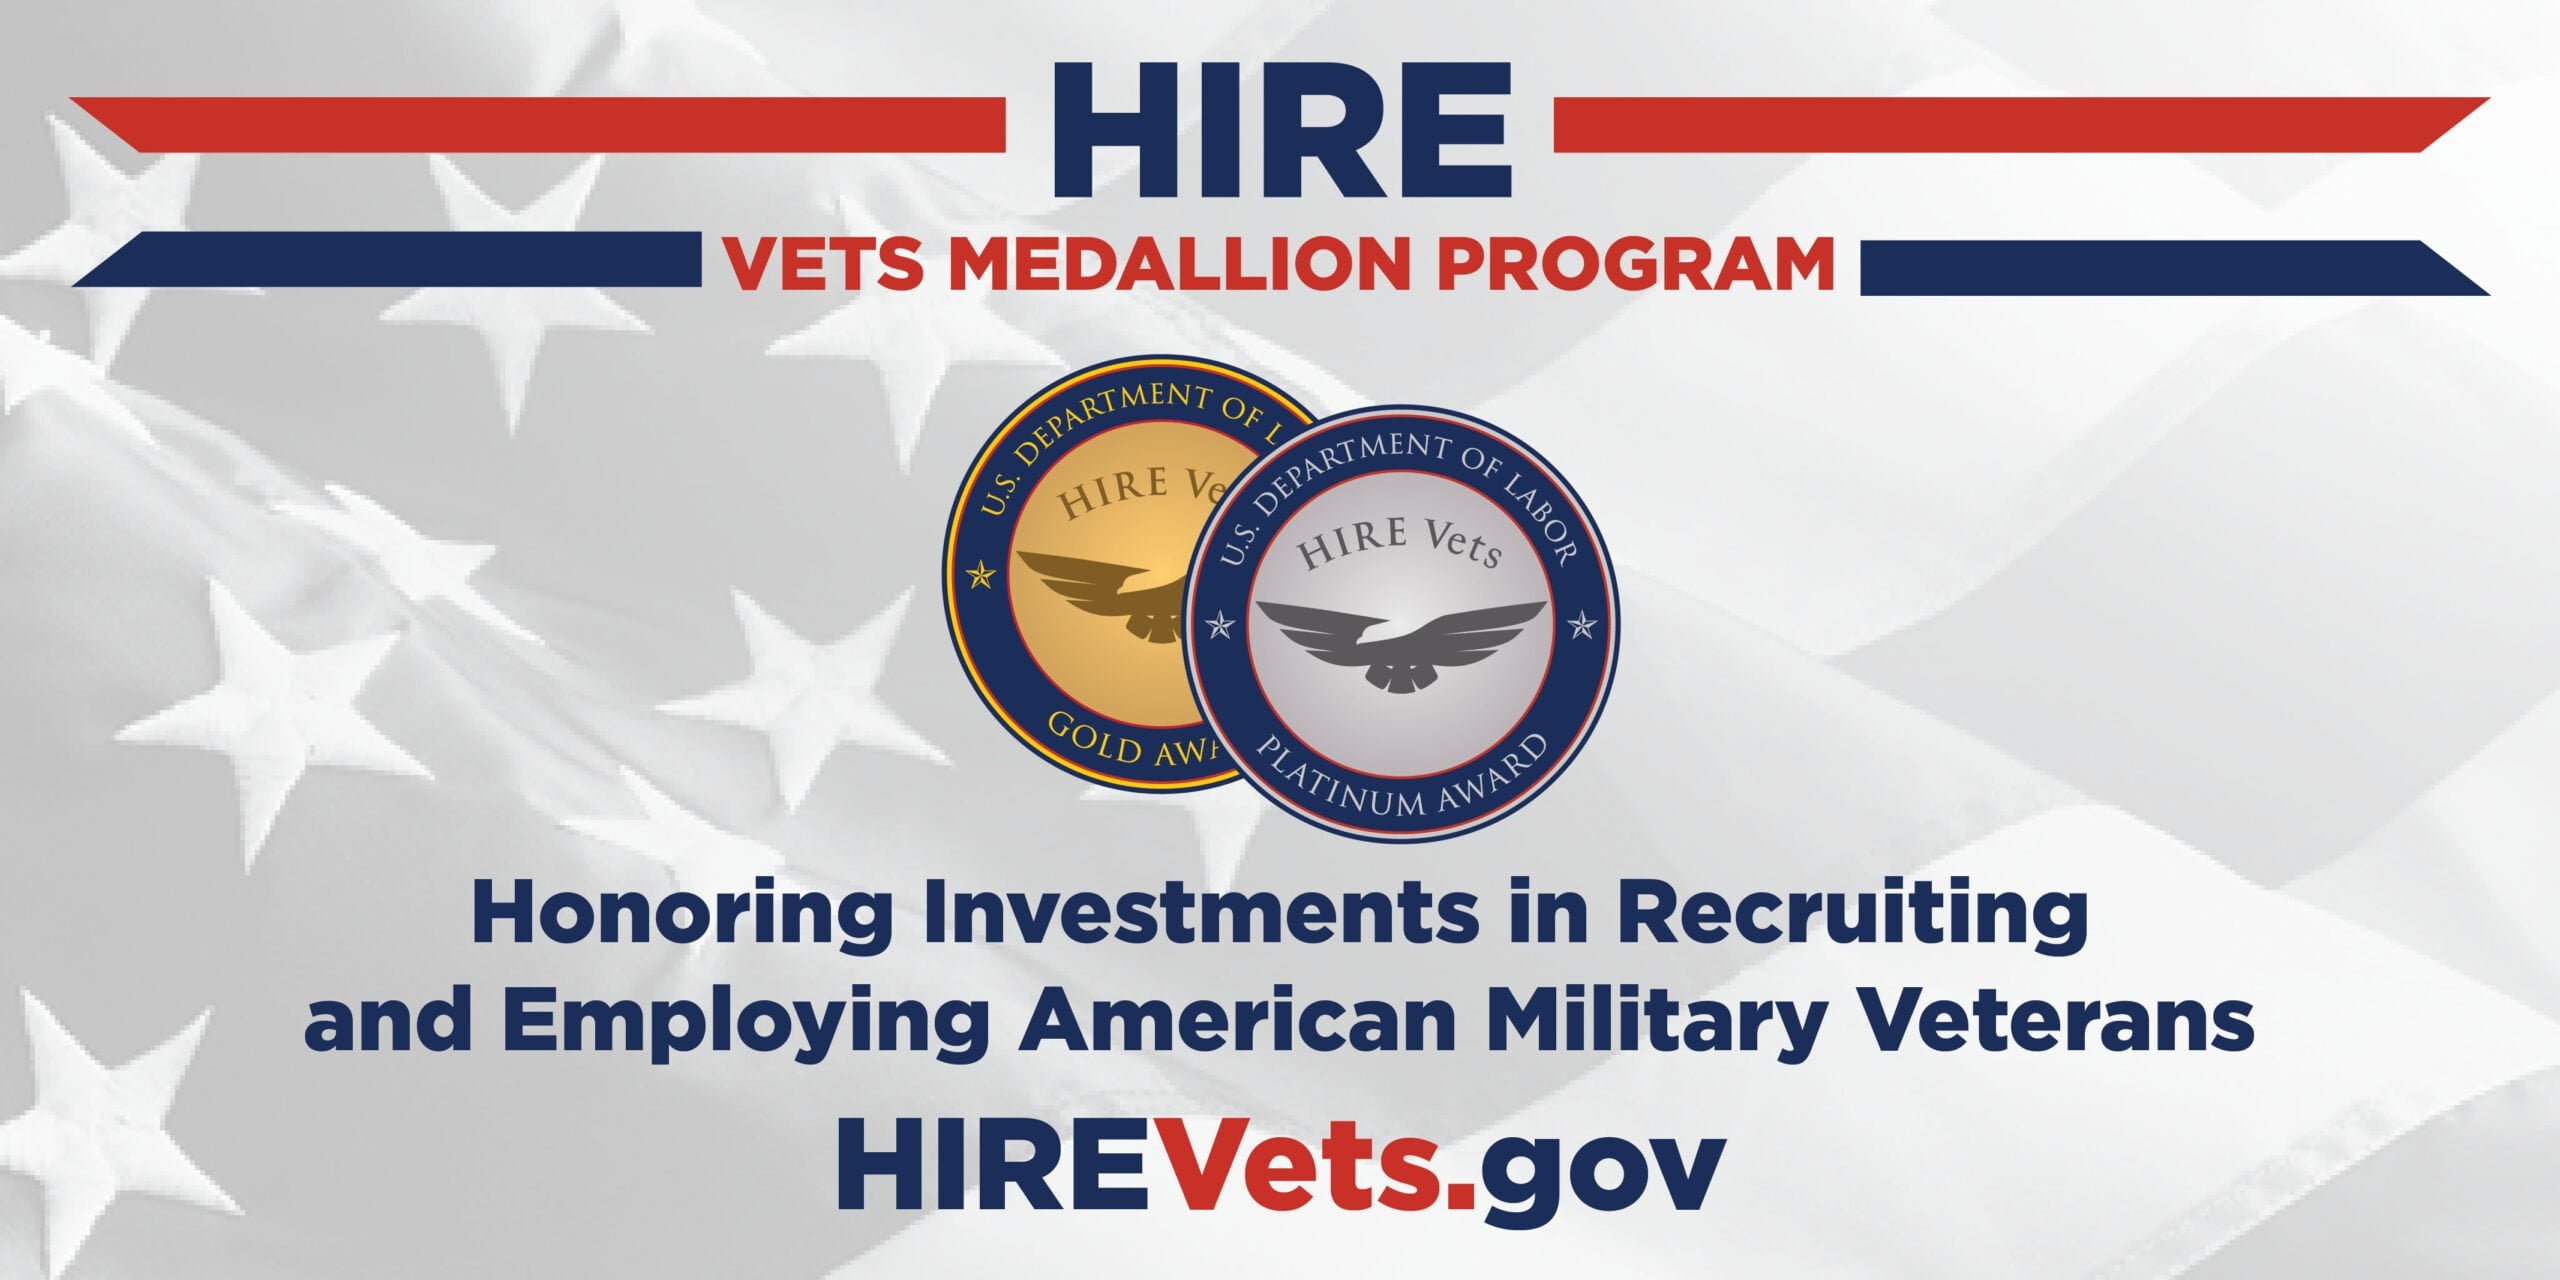 SHINE SYSTEMS RECEIVES 2021 HIRE VETS MEDALLION AWARD FROM U.S. DEPARTMENT OF LABOR